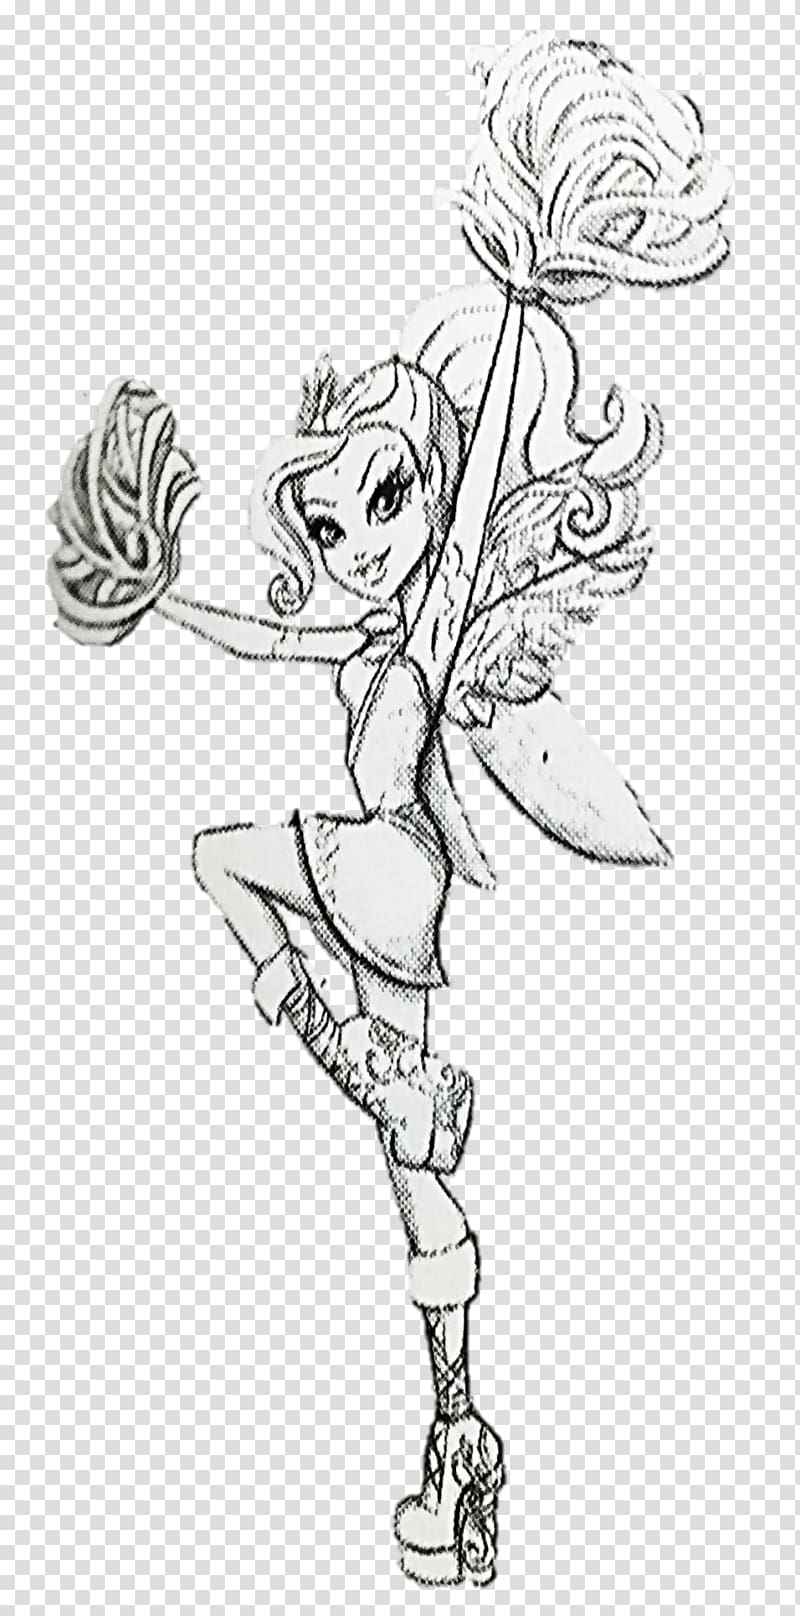 Ever After High Rapunzel Cheshire Cat Fairy godmother Sketch, sleeping beauty transparent background PNG clipart